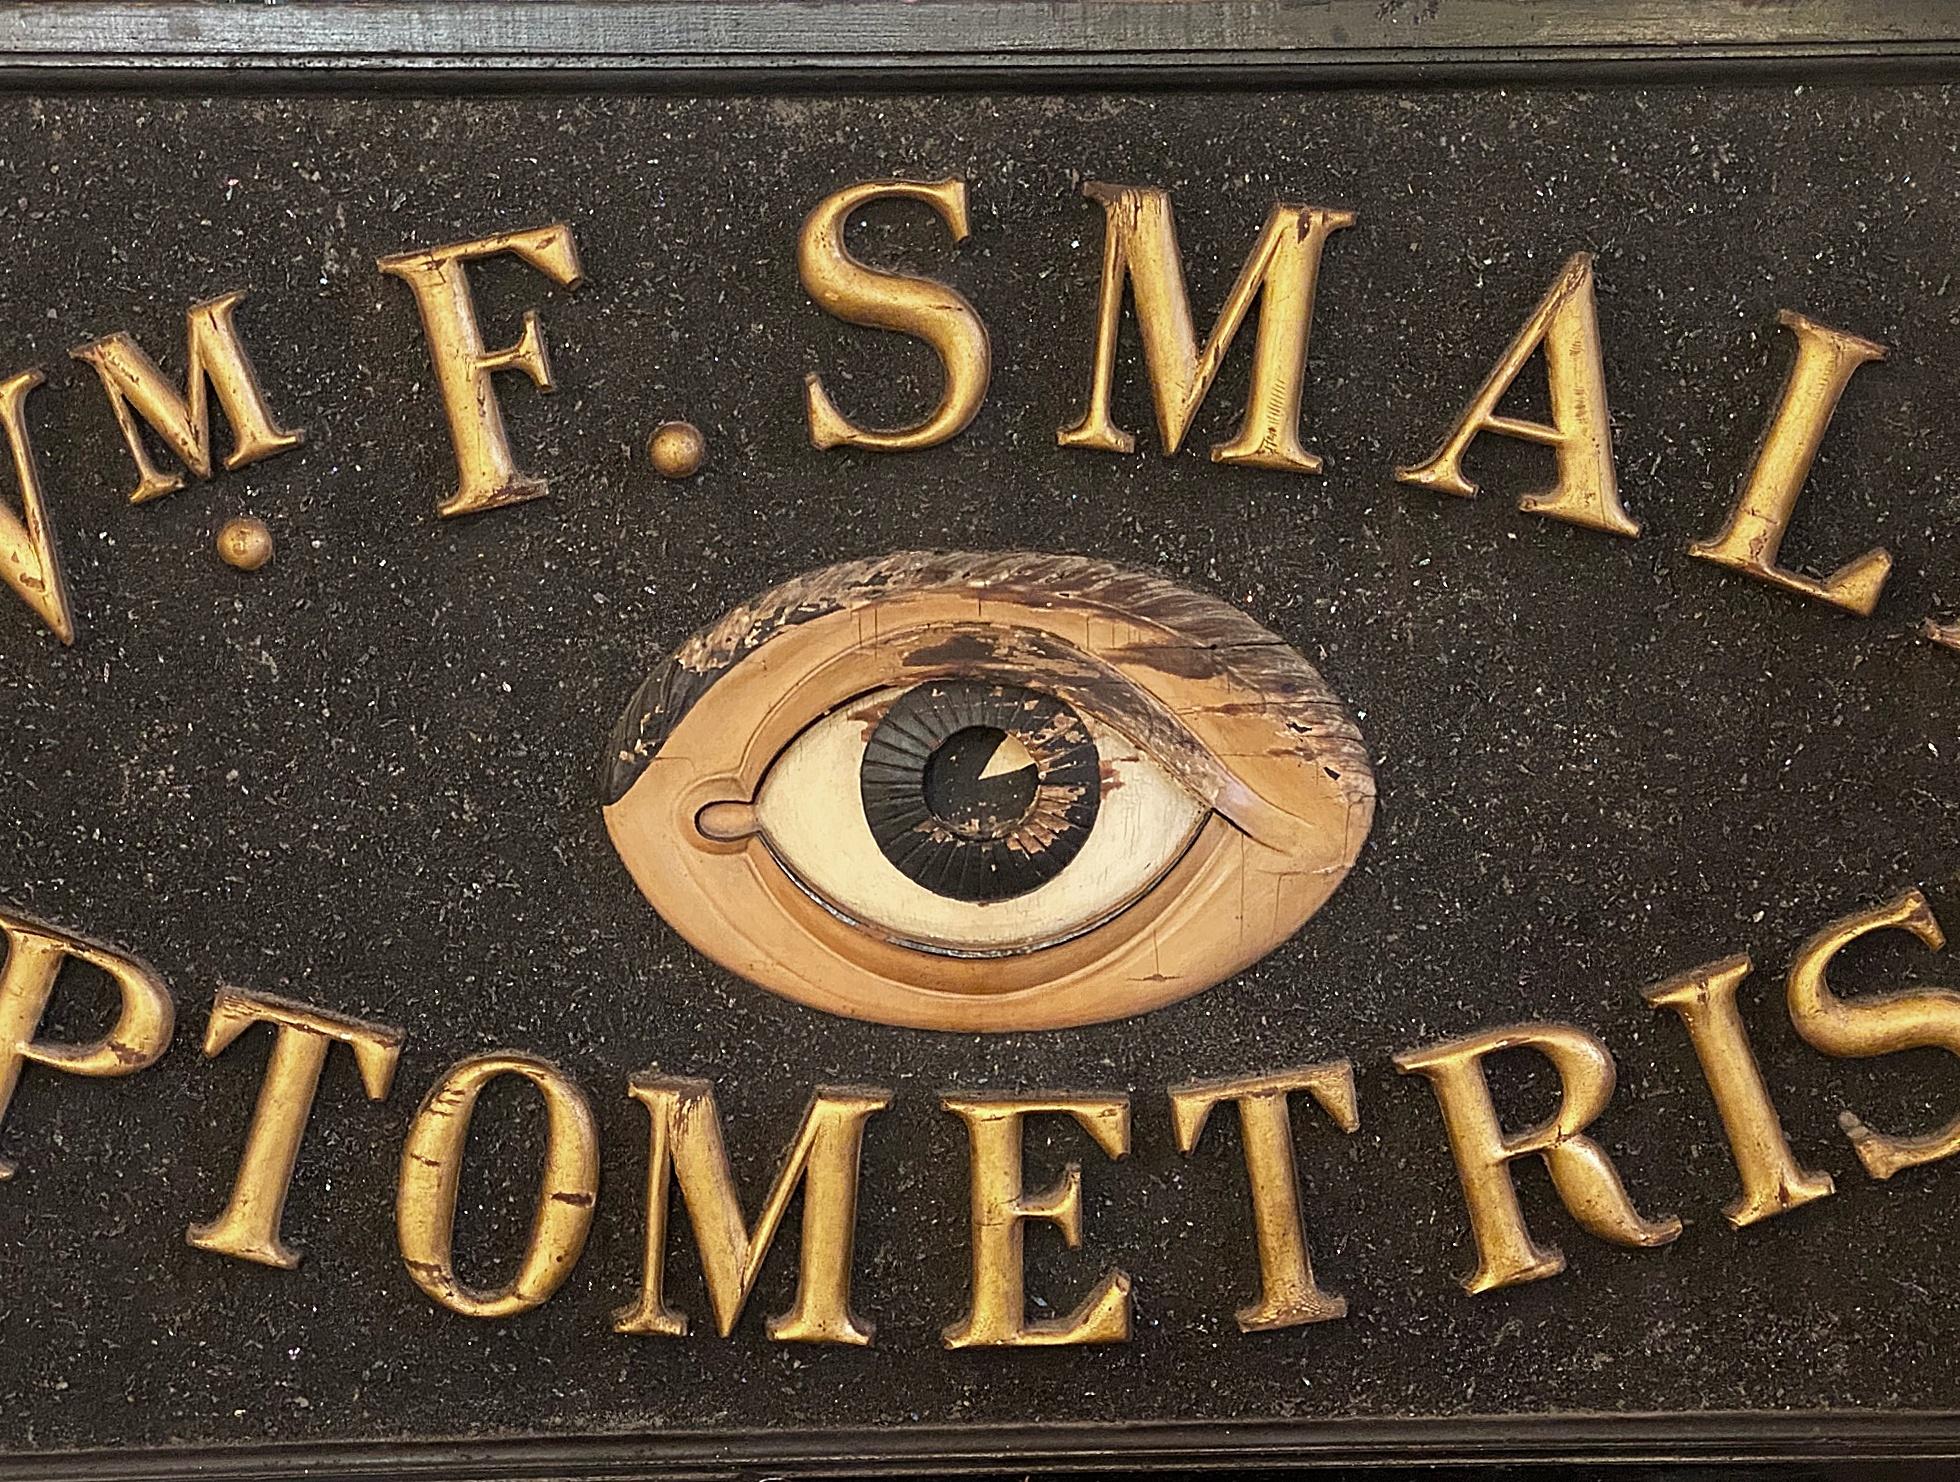 This great 1920s optometrist sign is double sided and in excellent condition. Made of all wood with gilded letters and a carved eye in the center. This can be seen at our 333 W 52nd St location, located in the Theater District West of Manhattan.